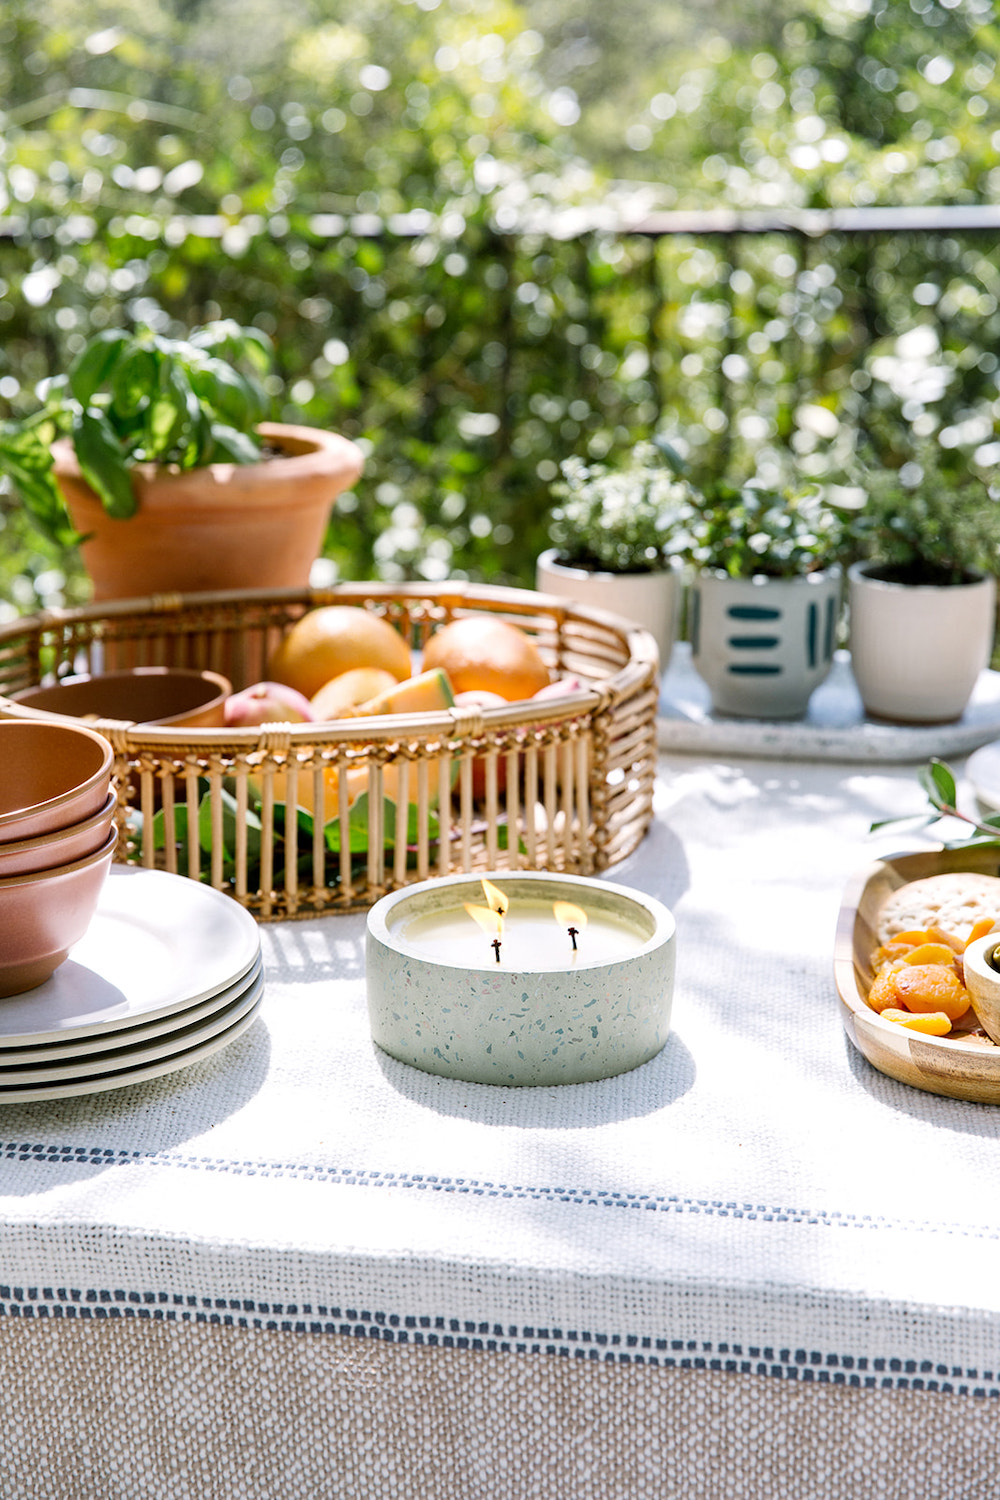 Spring Tabletop with Citronella Candle